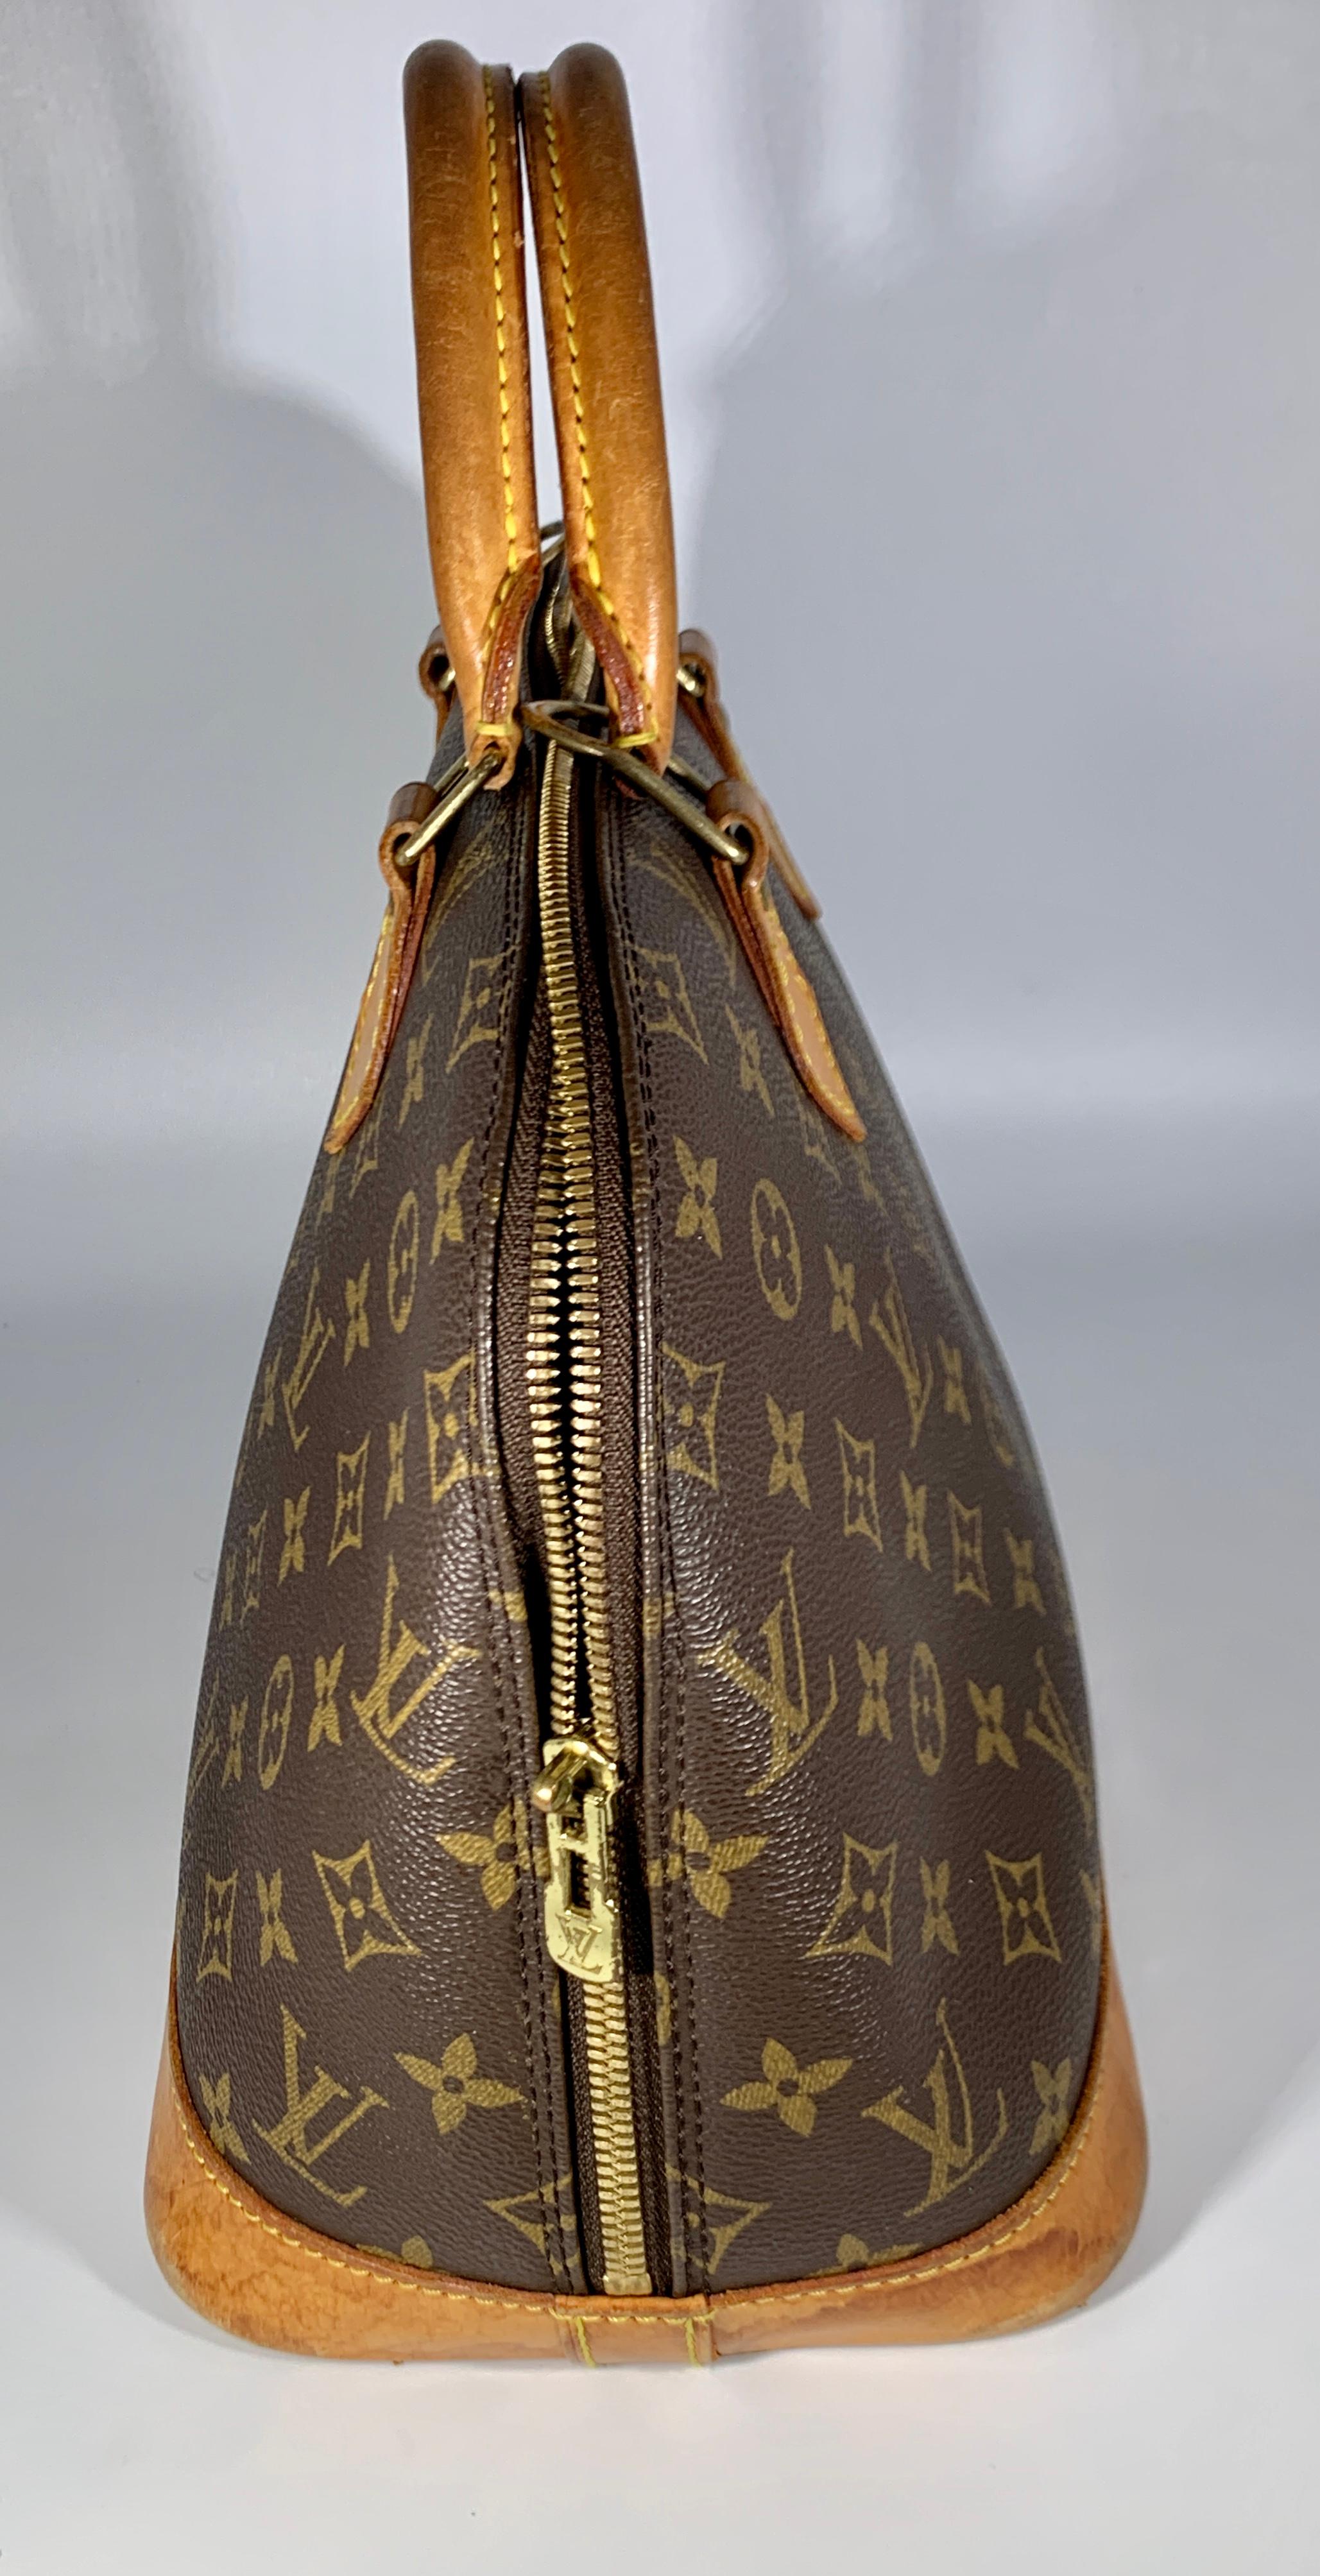 A Louis Vuitton logo-printed Louis Vuitton Speedy 30 with leather trim with bring a touch of heritage luxury wherever you carry it.
We guarantee this is an authentic LOUIS VUITTON Monogram Alma PM or 100% of your money back. This bowling-style